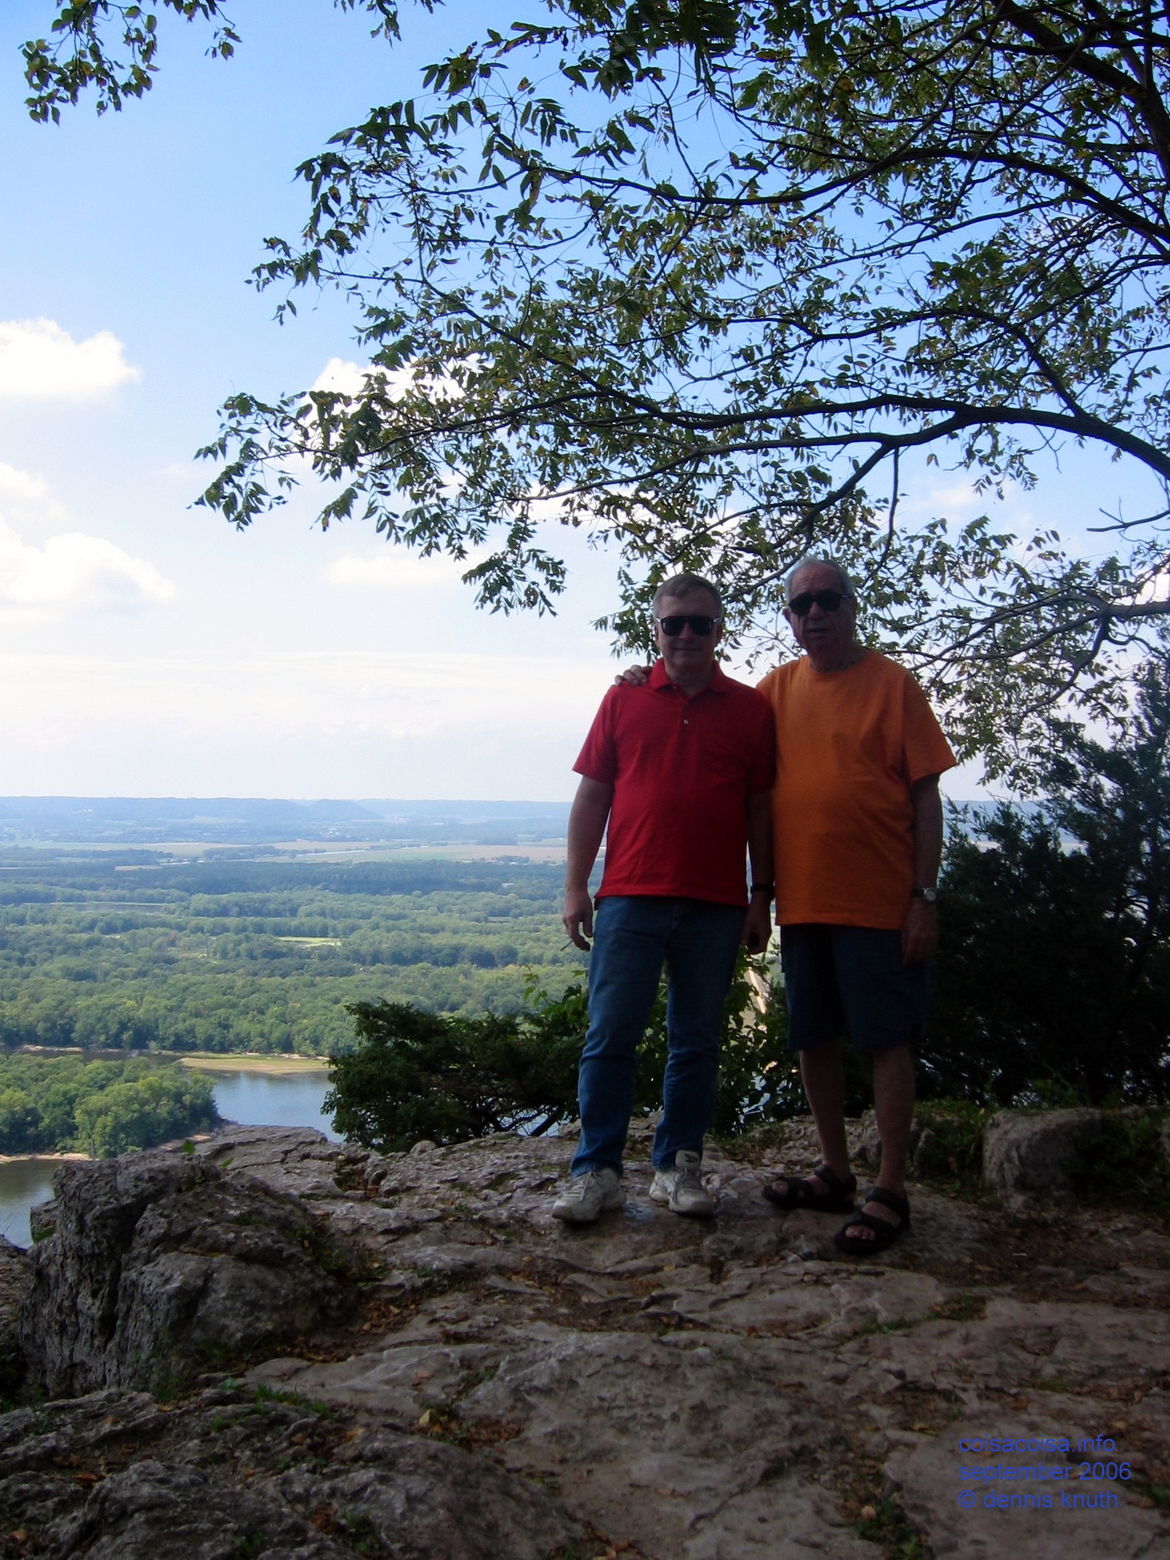 Muscio and Dennnis Knuth at the Mississippi Overlook at